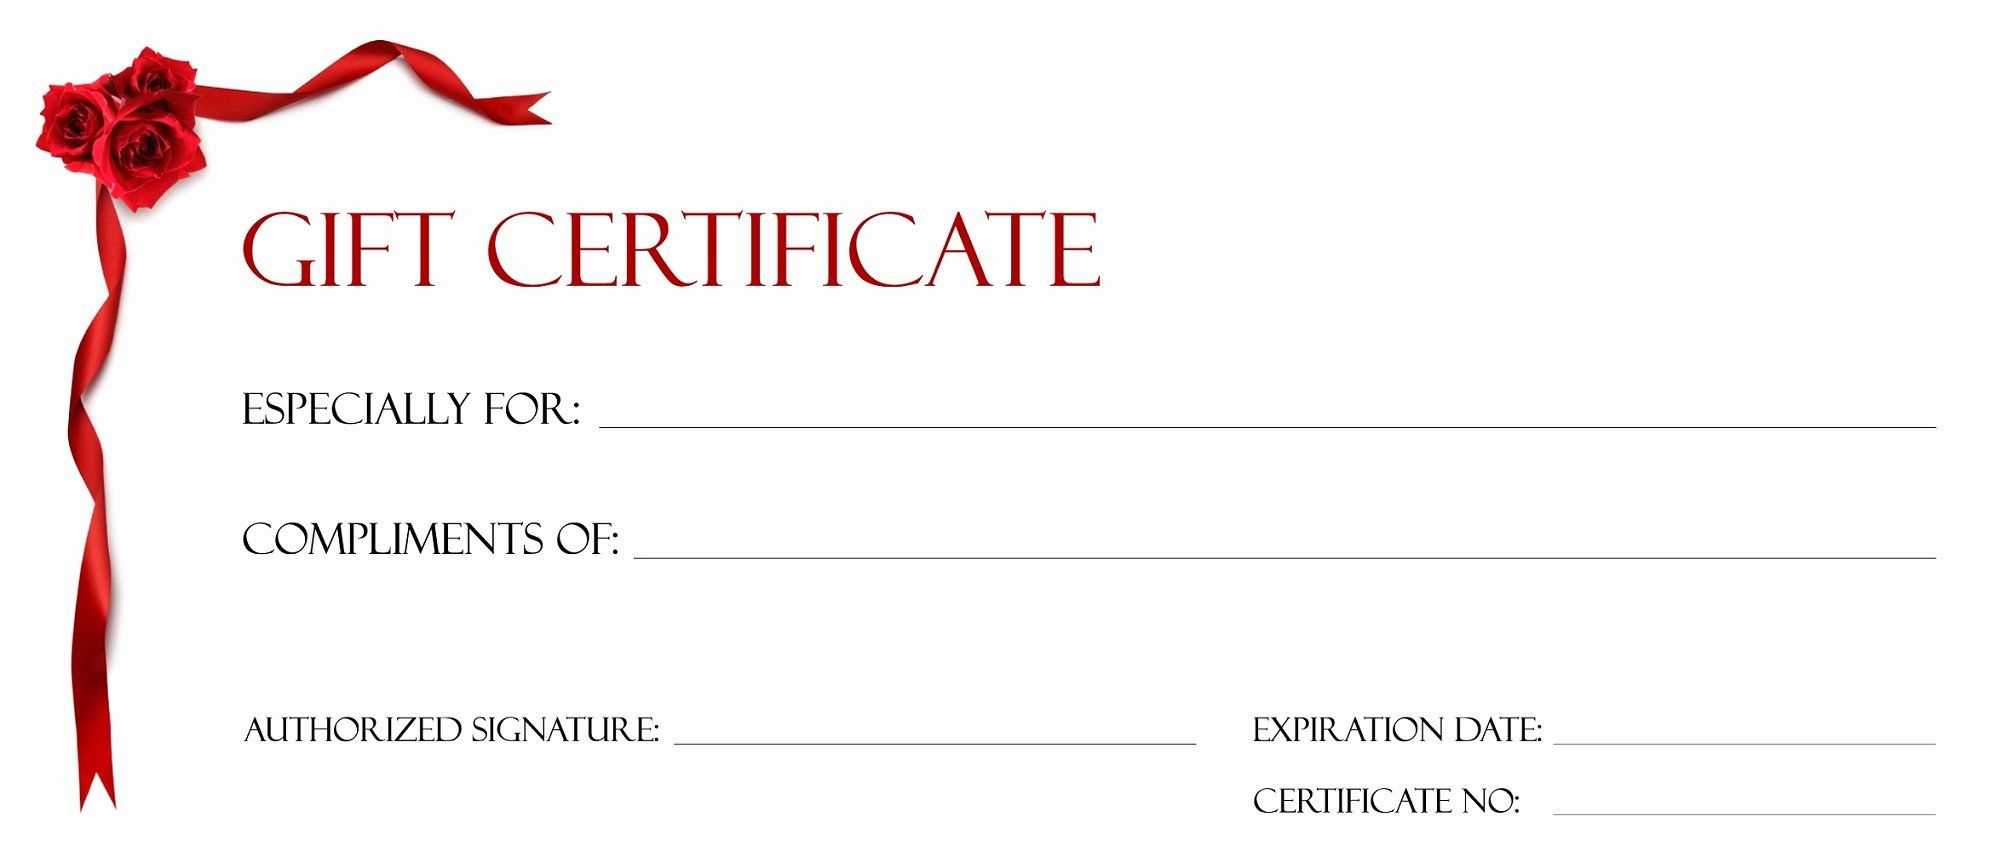 Free Gift Certificate Template Pages | Printablepedia In Certificate Template For Pages